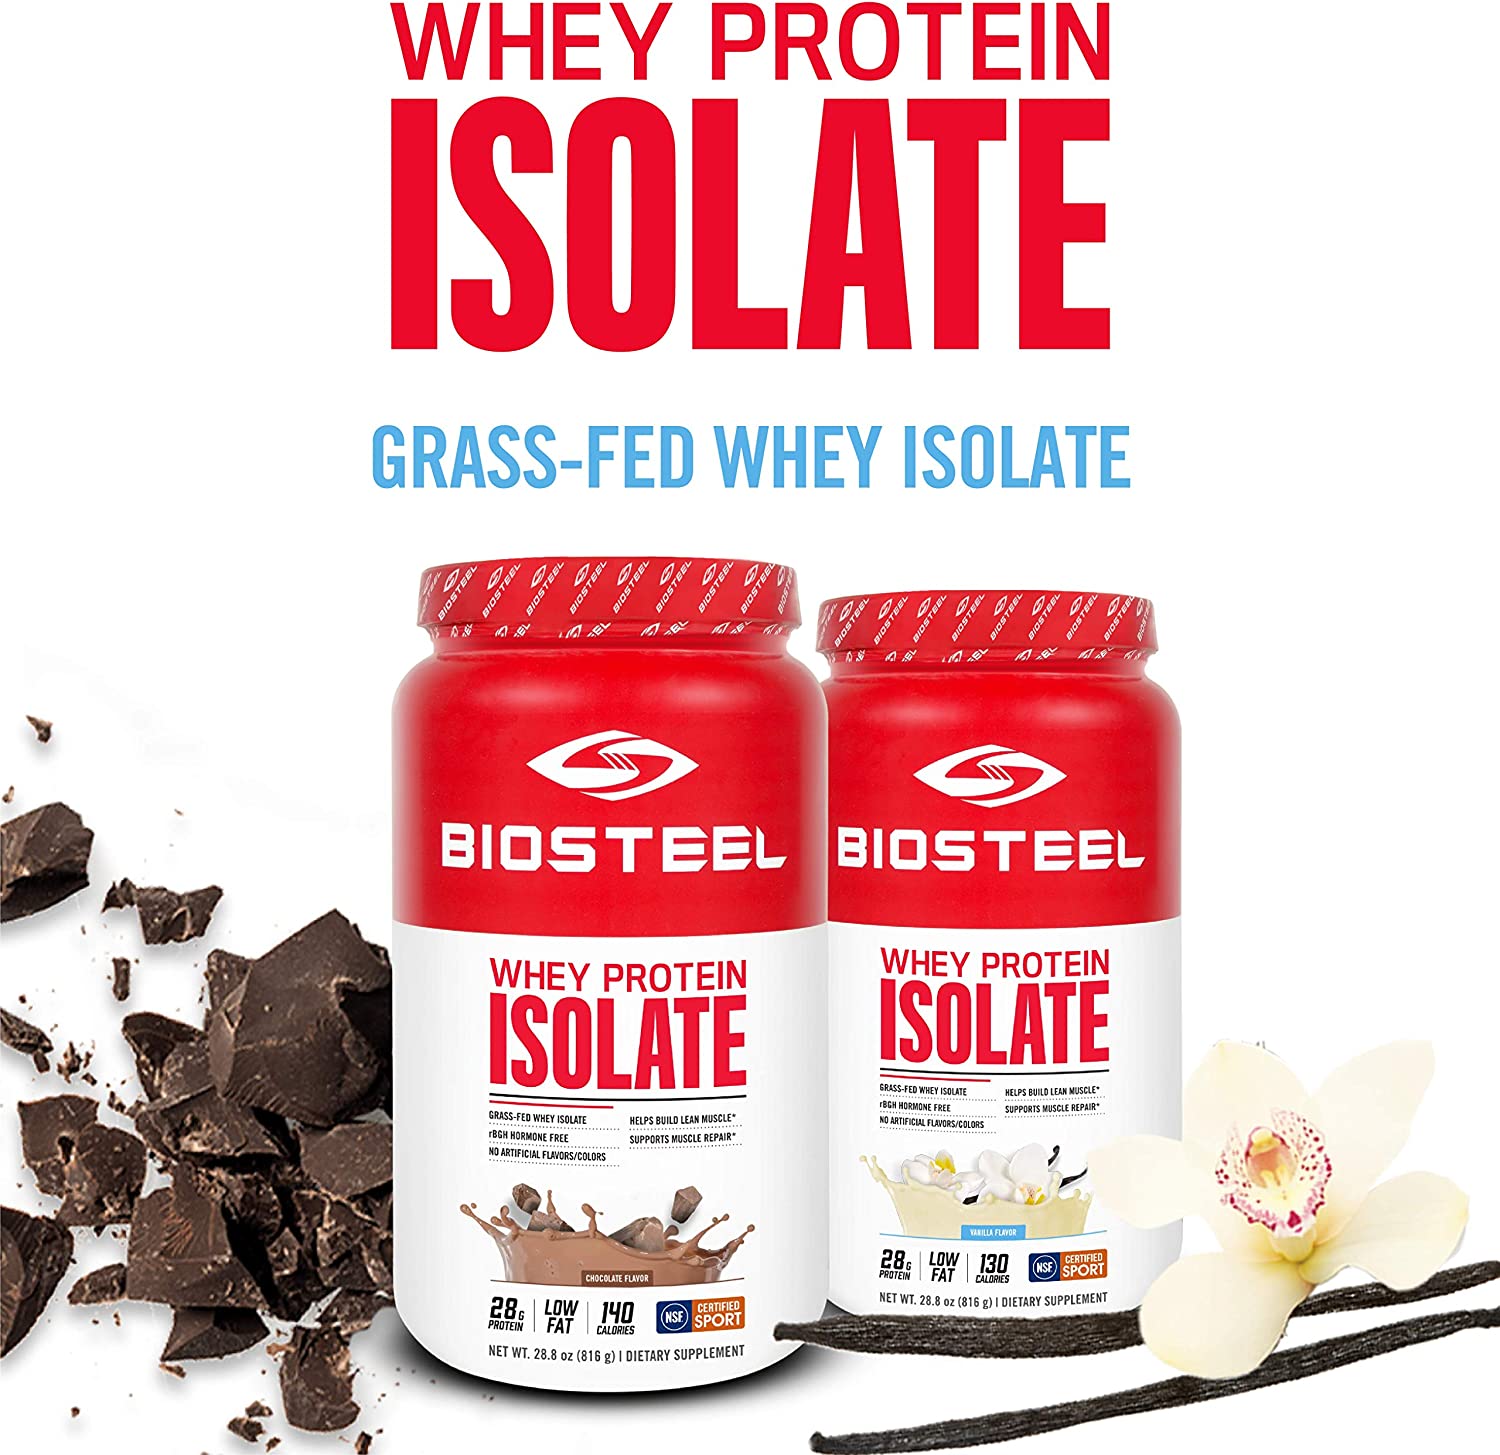 Biosteel Whey Protein Isolate 816g / Vanilla, Grass-fed whey isolate, SNS Health, Sports Nutrition